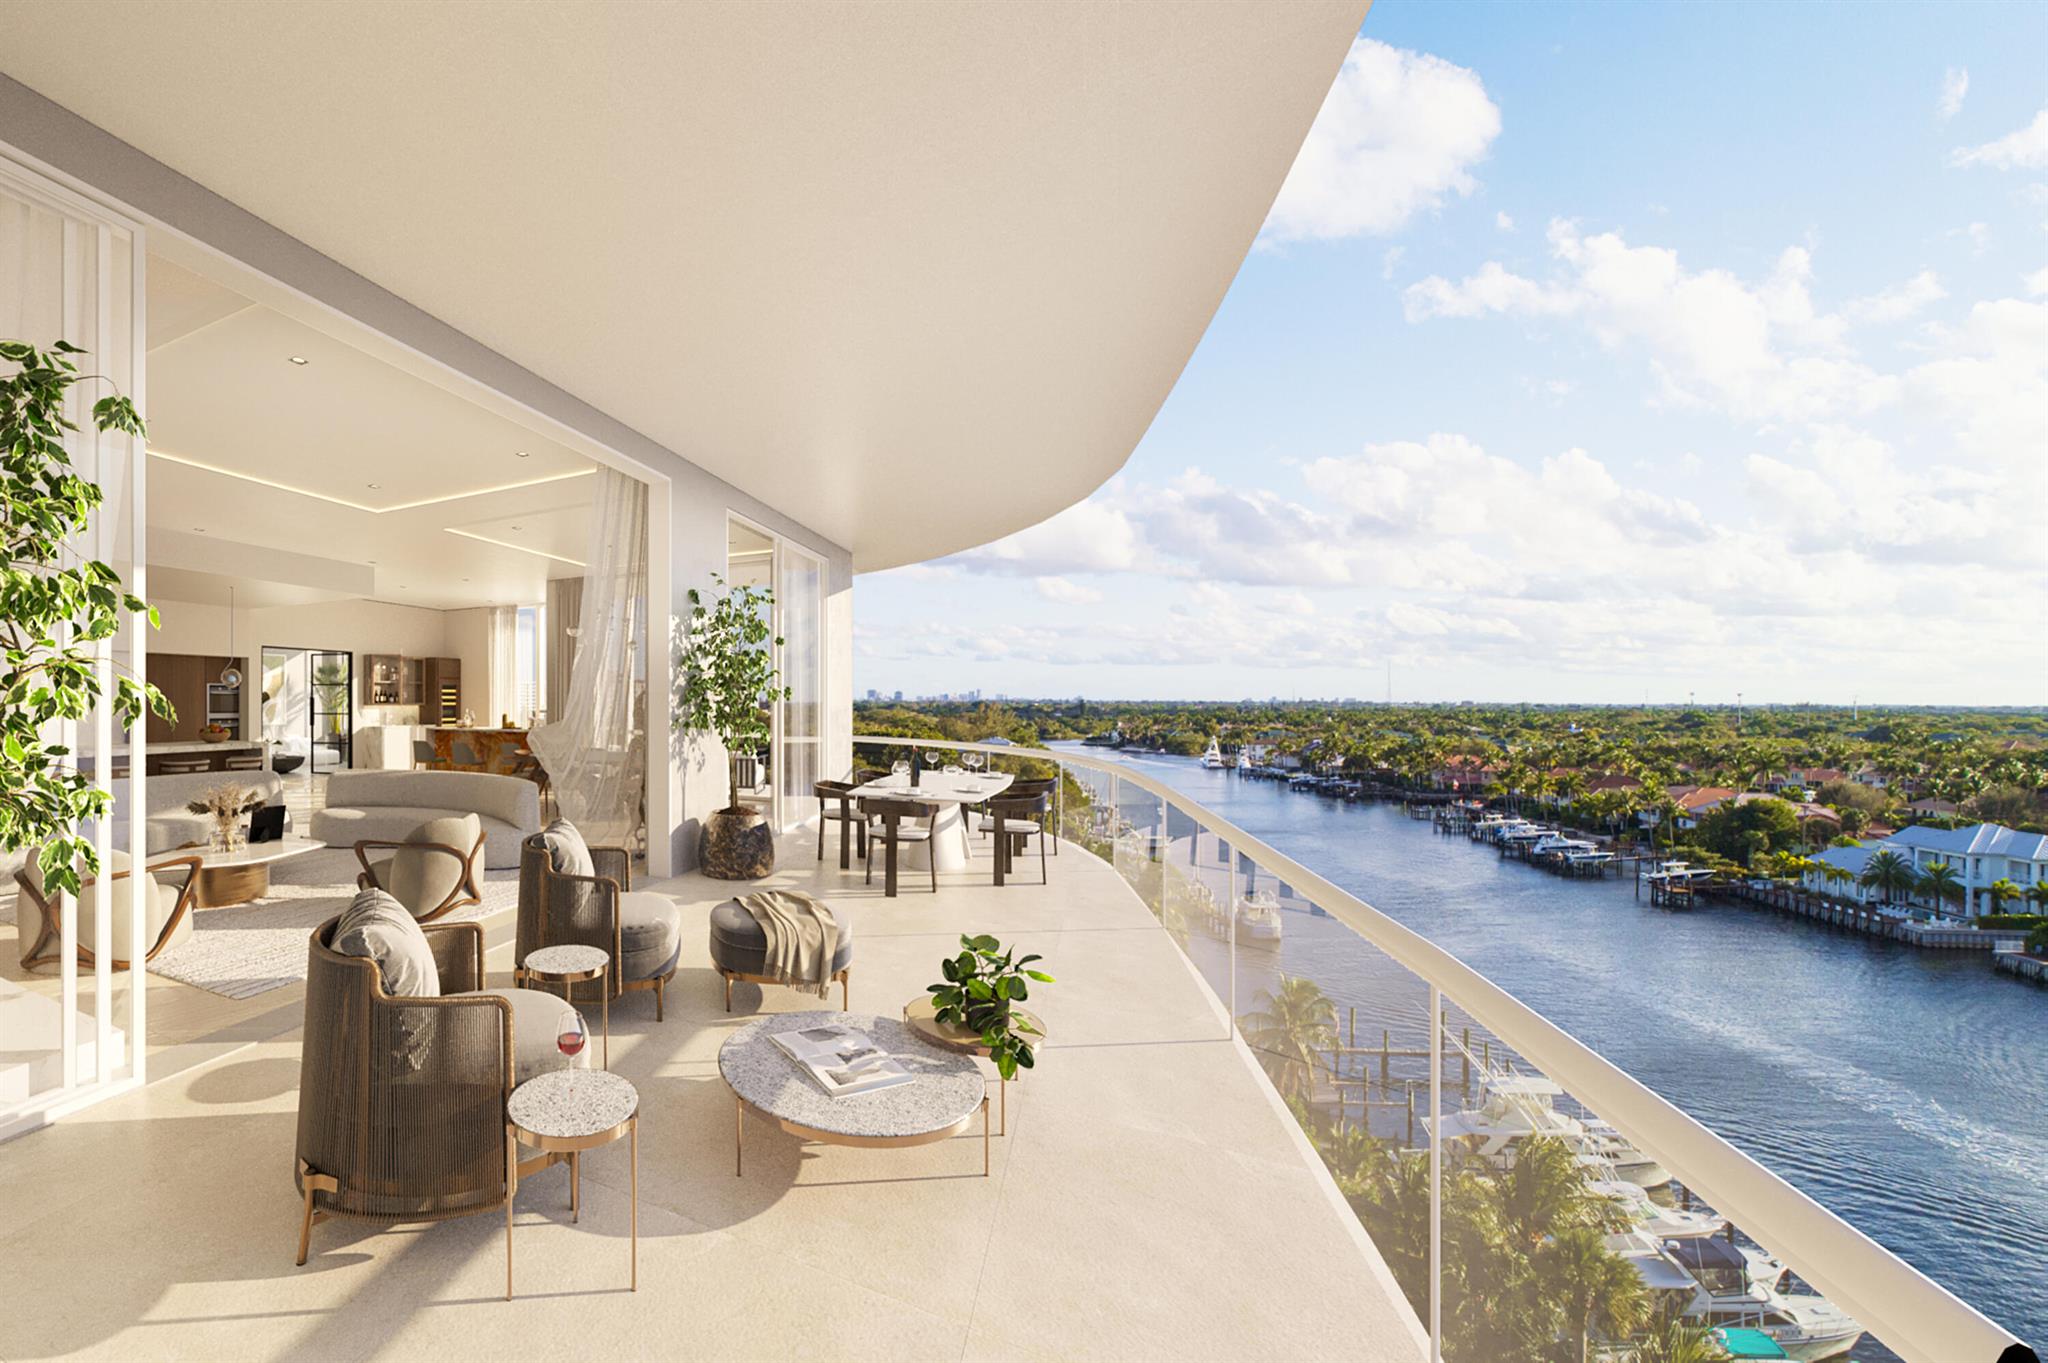 Embark on refined luxury at The Ritz-Carlton Residences--now under construction on a 14-acre, one-of-a-kind property along the intracoastal waterway in the heart of Palm Beach Gardens' dining, shopping & marina district. With just 106 residences & 29 boat slips, this masterpiece offers 3 to 5 bedroom residences, expansive terraces & 2 assigned garaged parking spaces. All offer floor-to-ceiling triple-paned windows capturing marina & sunset views. High end appliances. 24-hr concierge, guard gate & valet. Countless amenities include fitness center, pickleball, resort style pool w/ lap lane & much more. Anticipated completion of Q1 2026 promises a lifestyle defined by unparalleled sophistication & luxury.